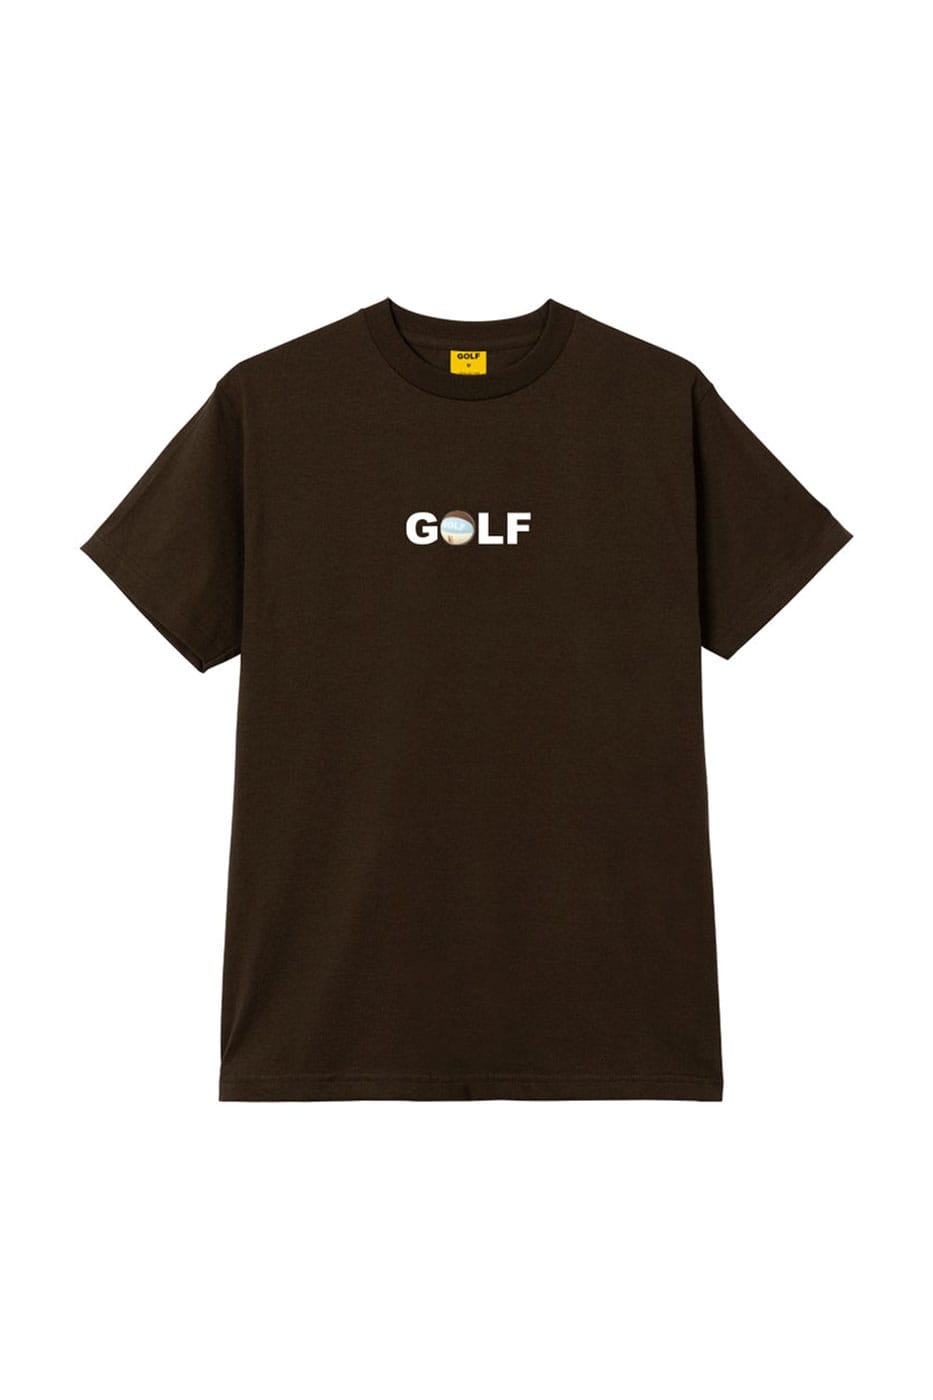 GOLF WANG GOLF CHAMPIONSHIP Collection Release | Hypebeast